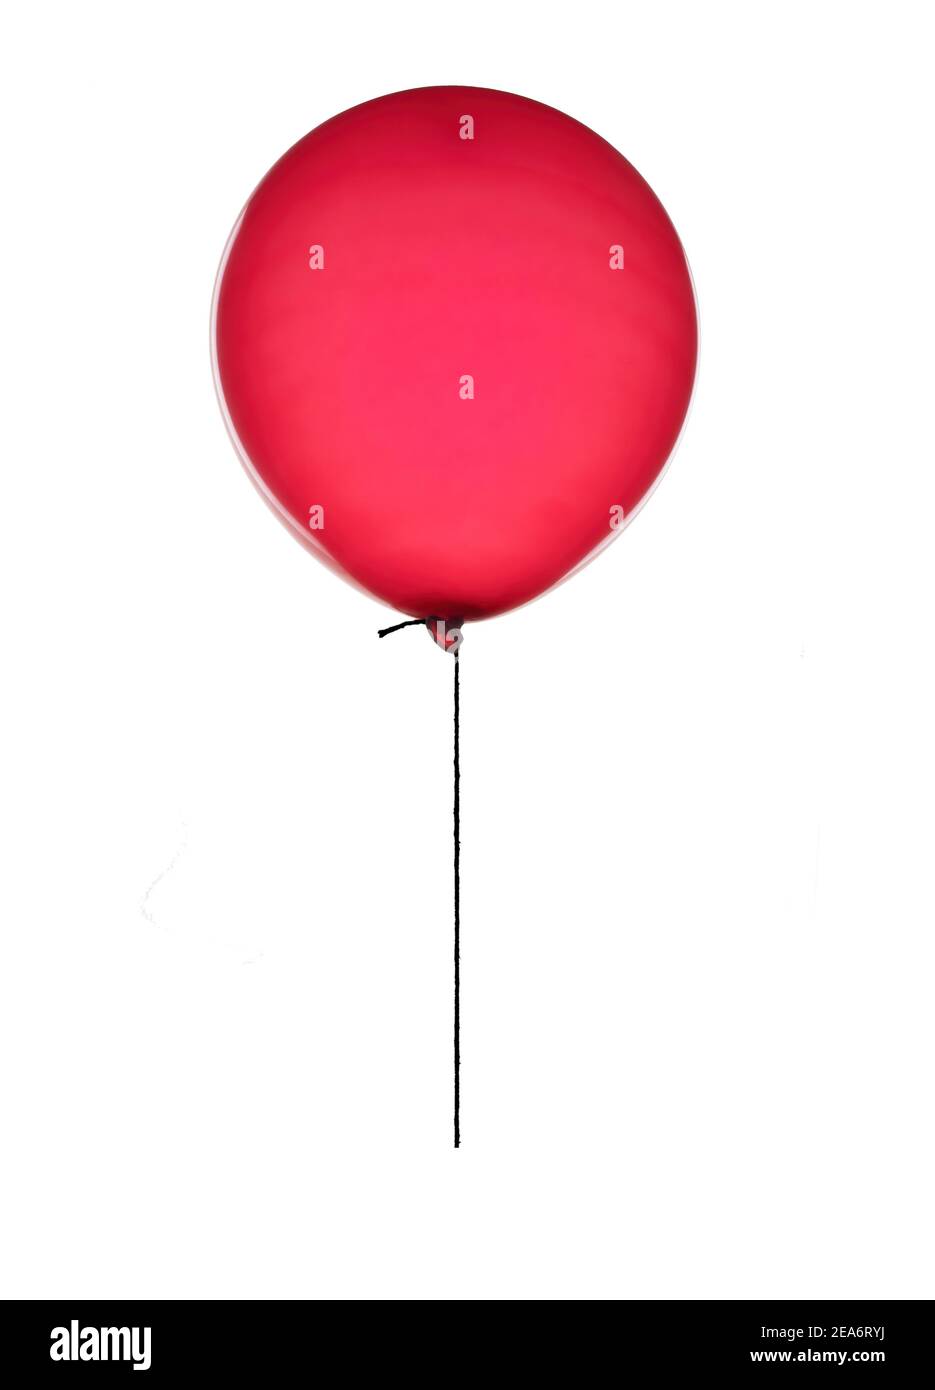 https://c8.alamy.com/comp/2EA6RYJ/real-red-party-balloon-isolated-on-white-2EA6RYJ.jpg